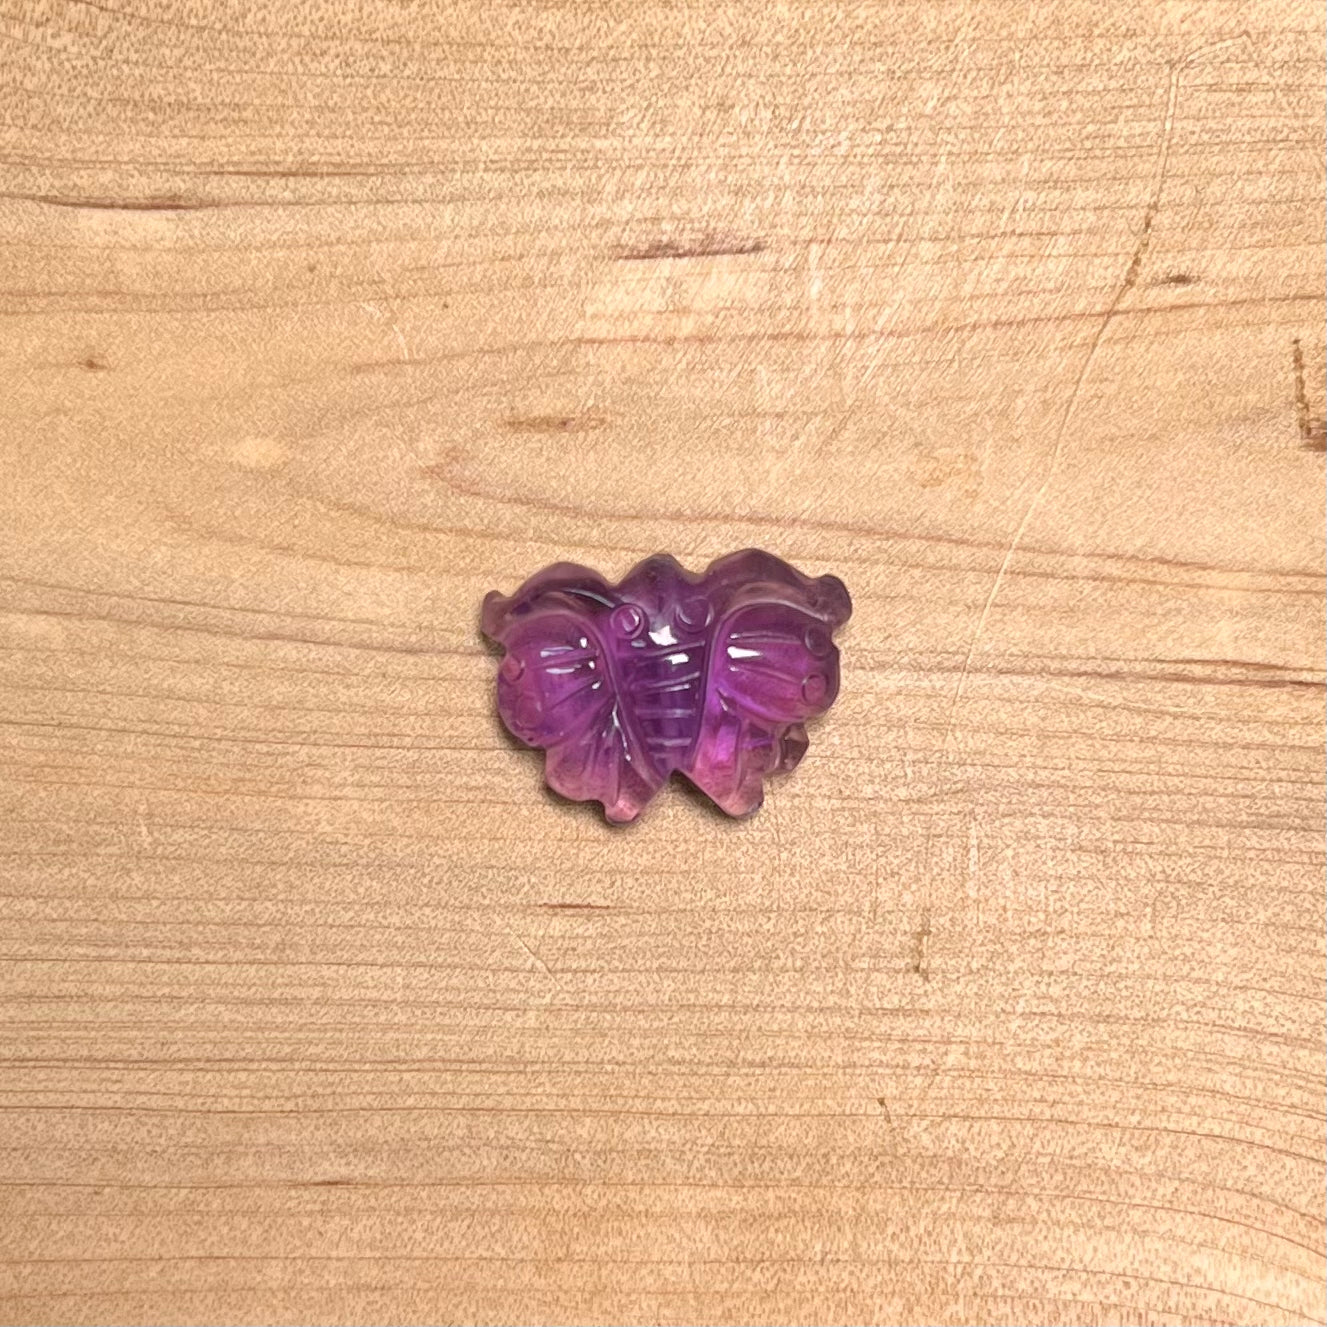 Amethyst butterfly carving charm bead